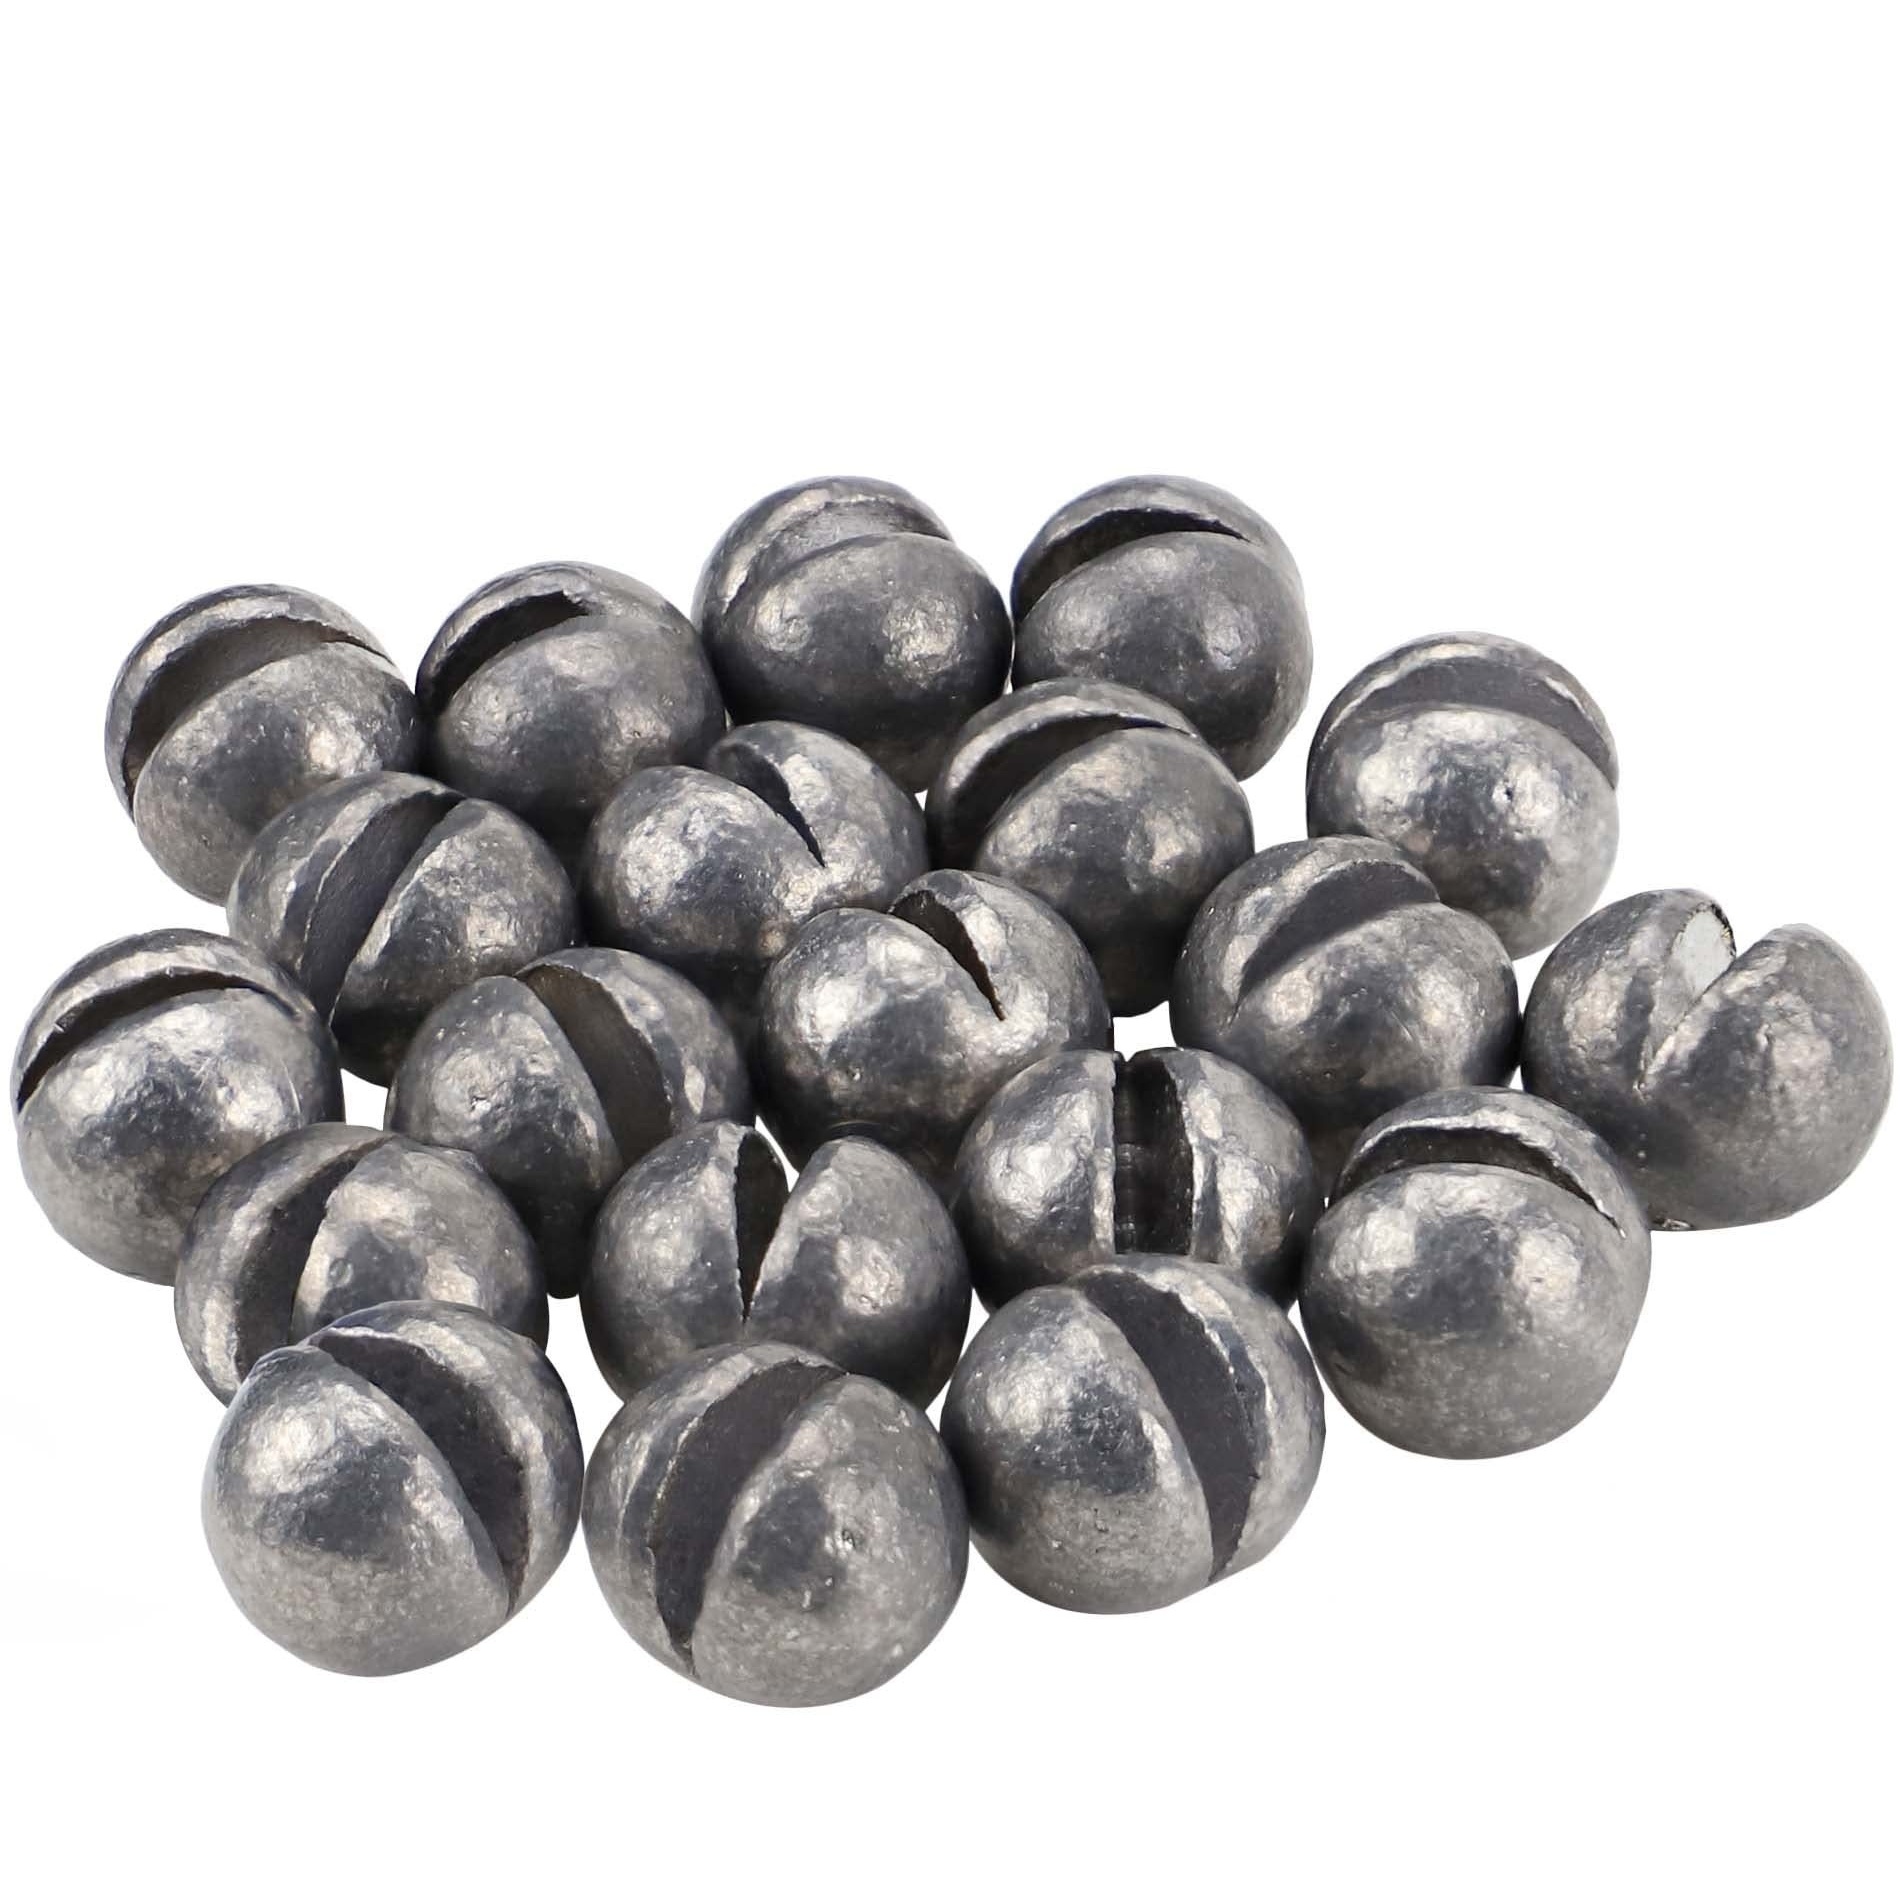 Soft Lead Sheet Strip Sinkers - Fishing Weights For Tackle Accessories And  Supplies - Easy To Use And Effective For Catching More Fish - Temu Sweden